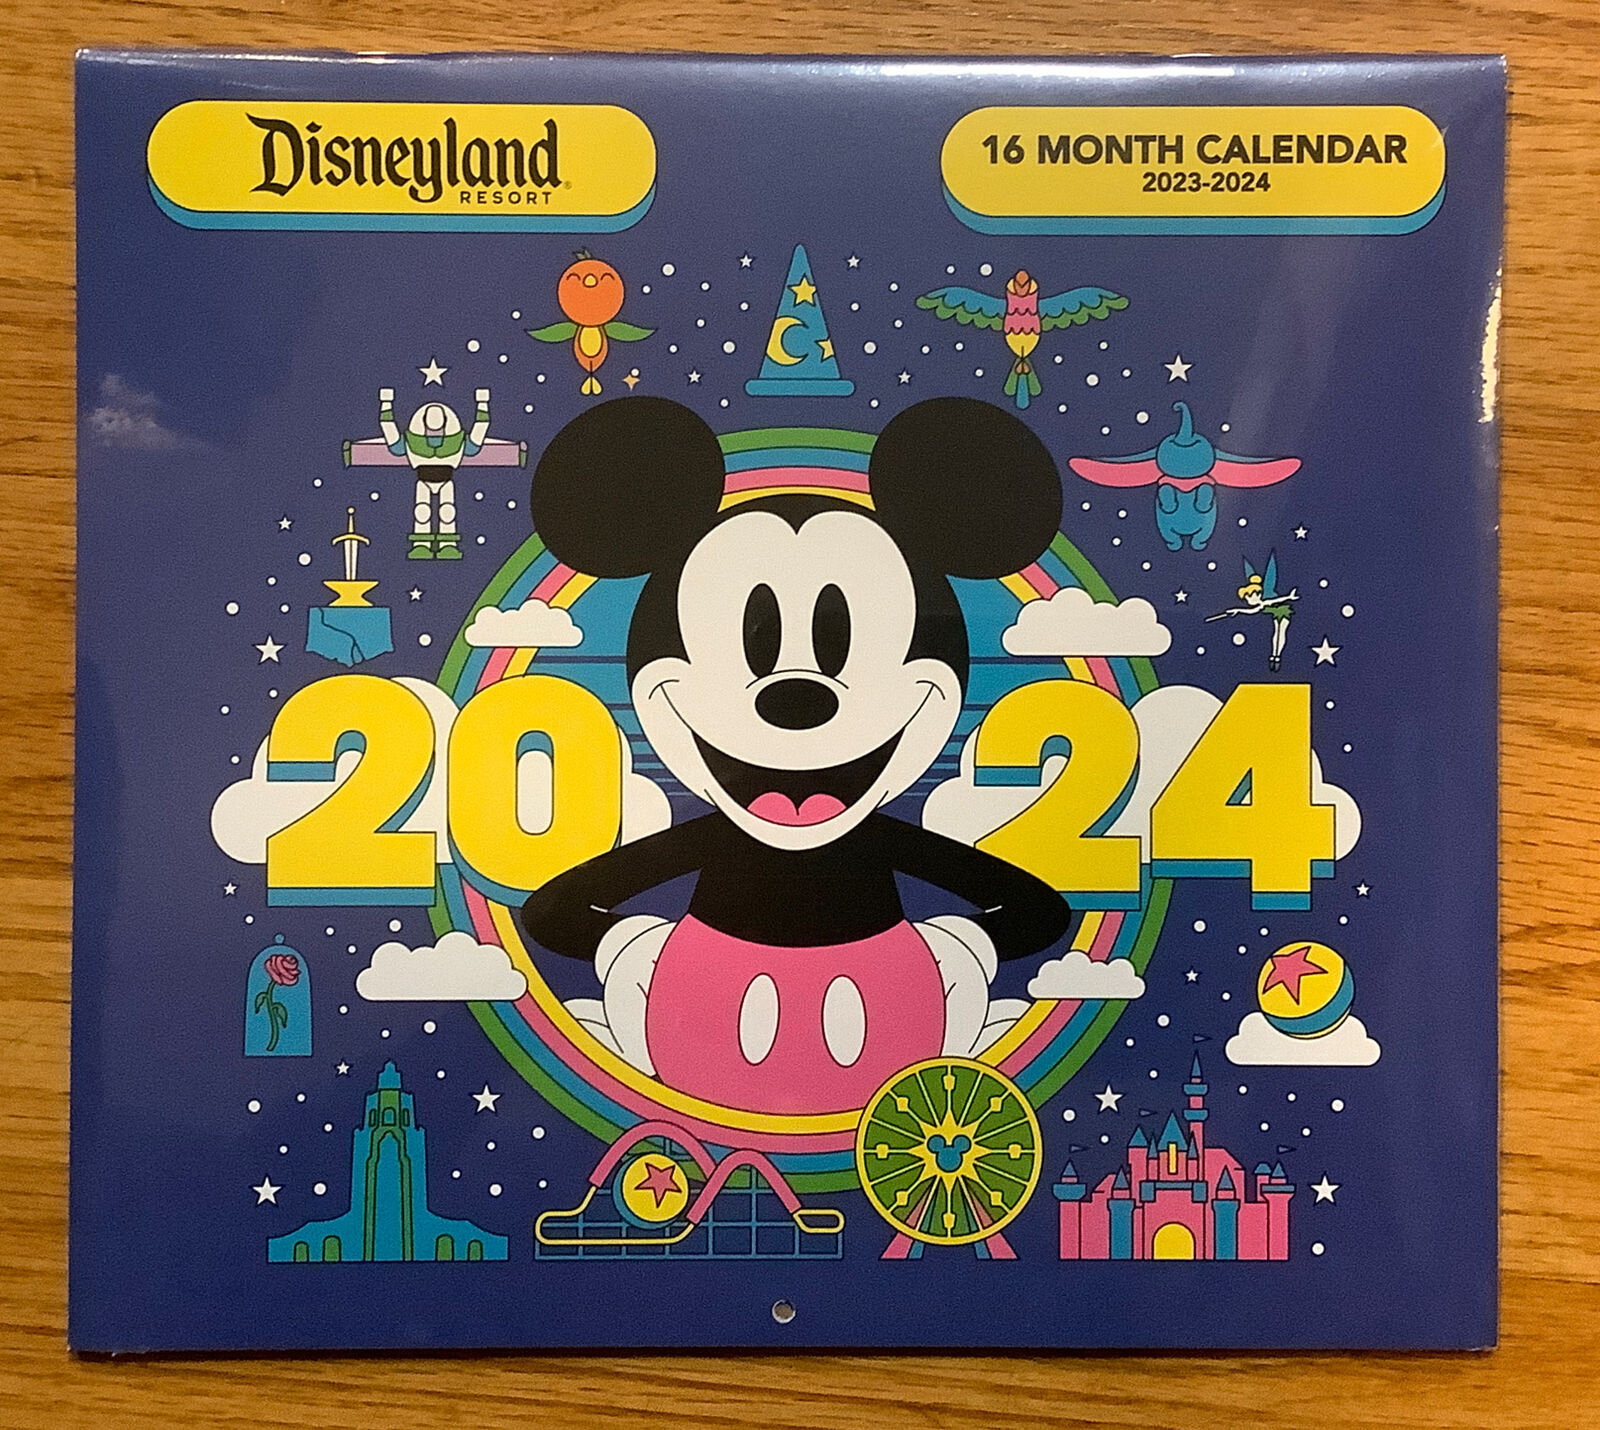 Disney Parks Disneyland 20232024 Mickey Mouse 16 Month Calendar New in